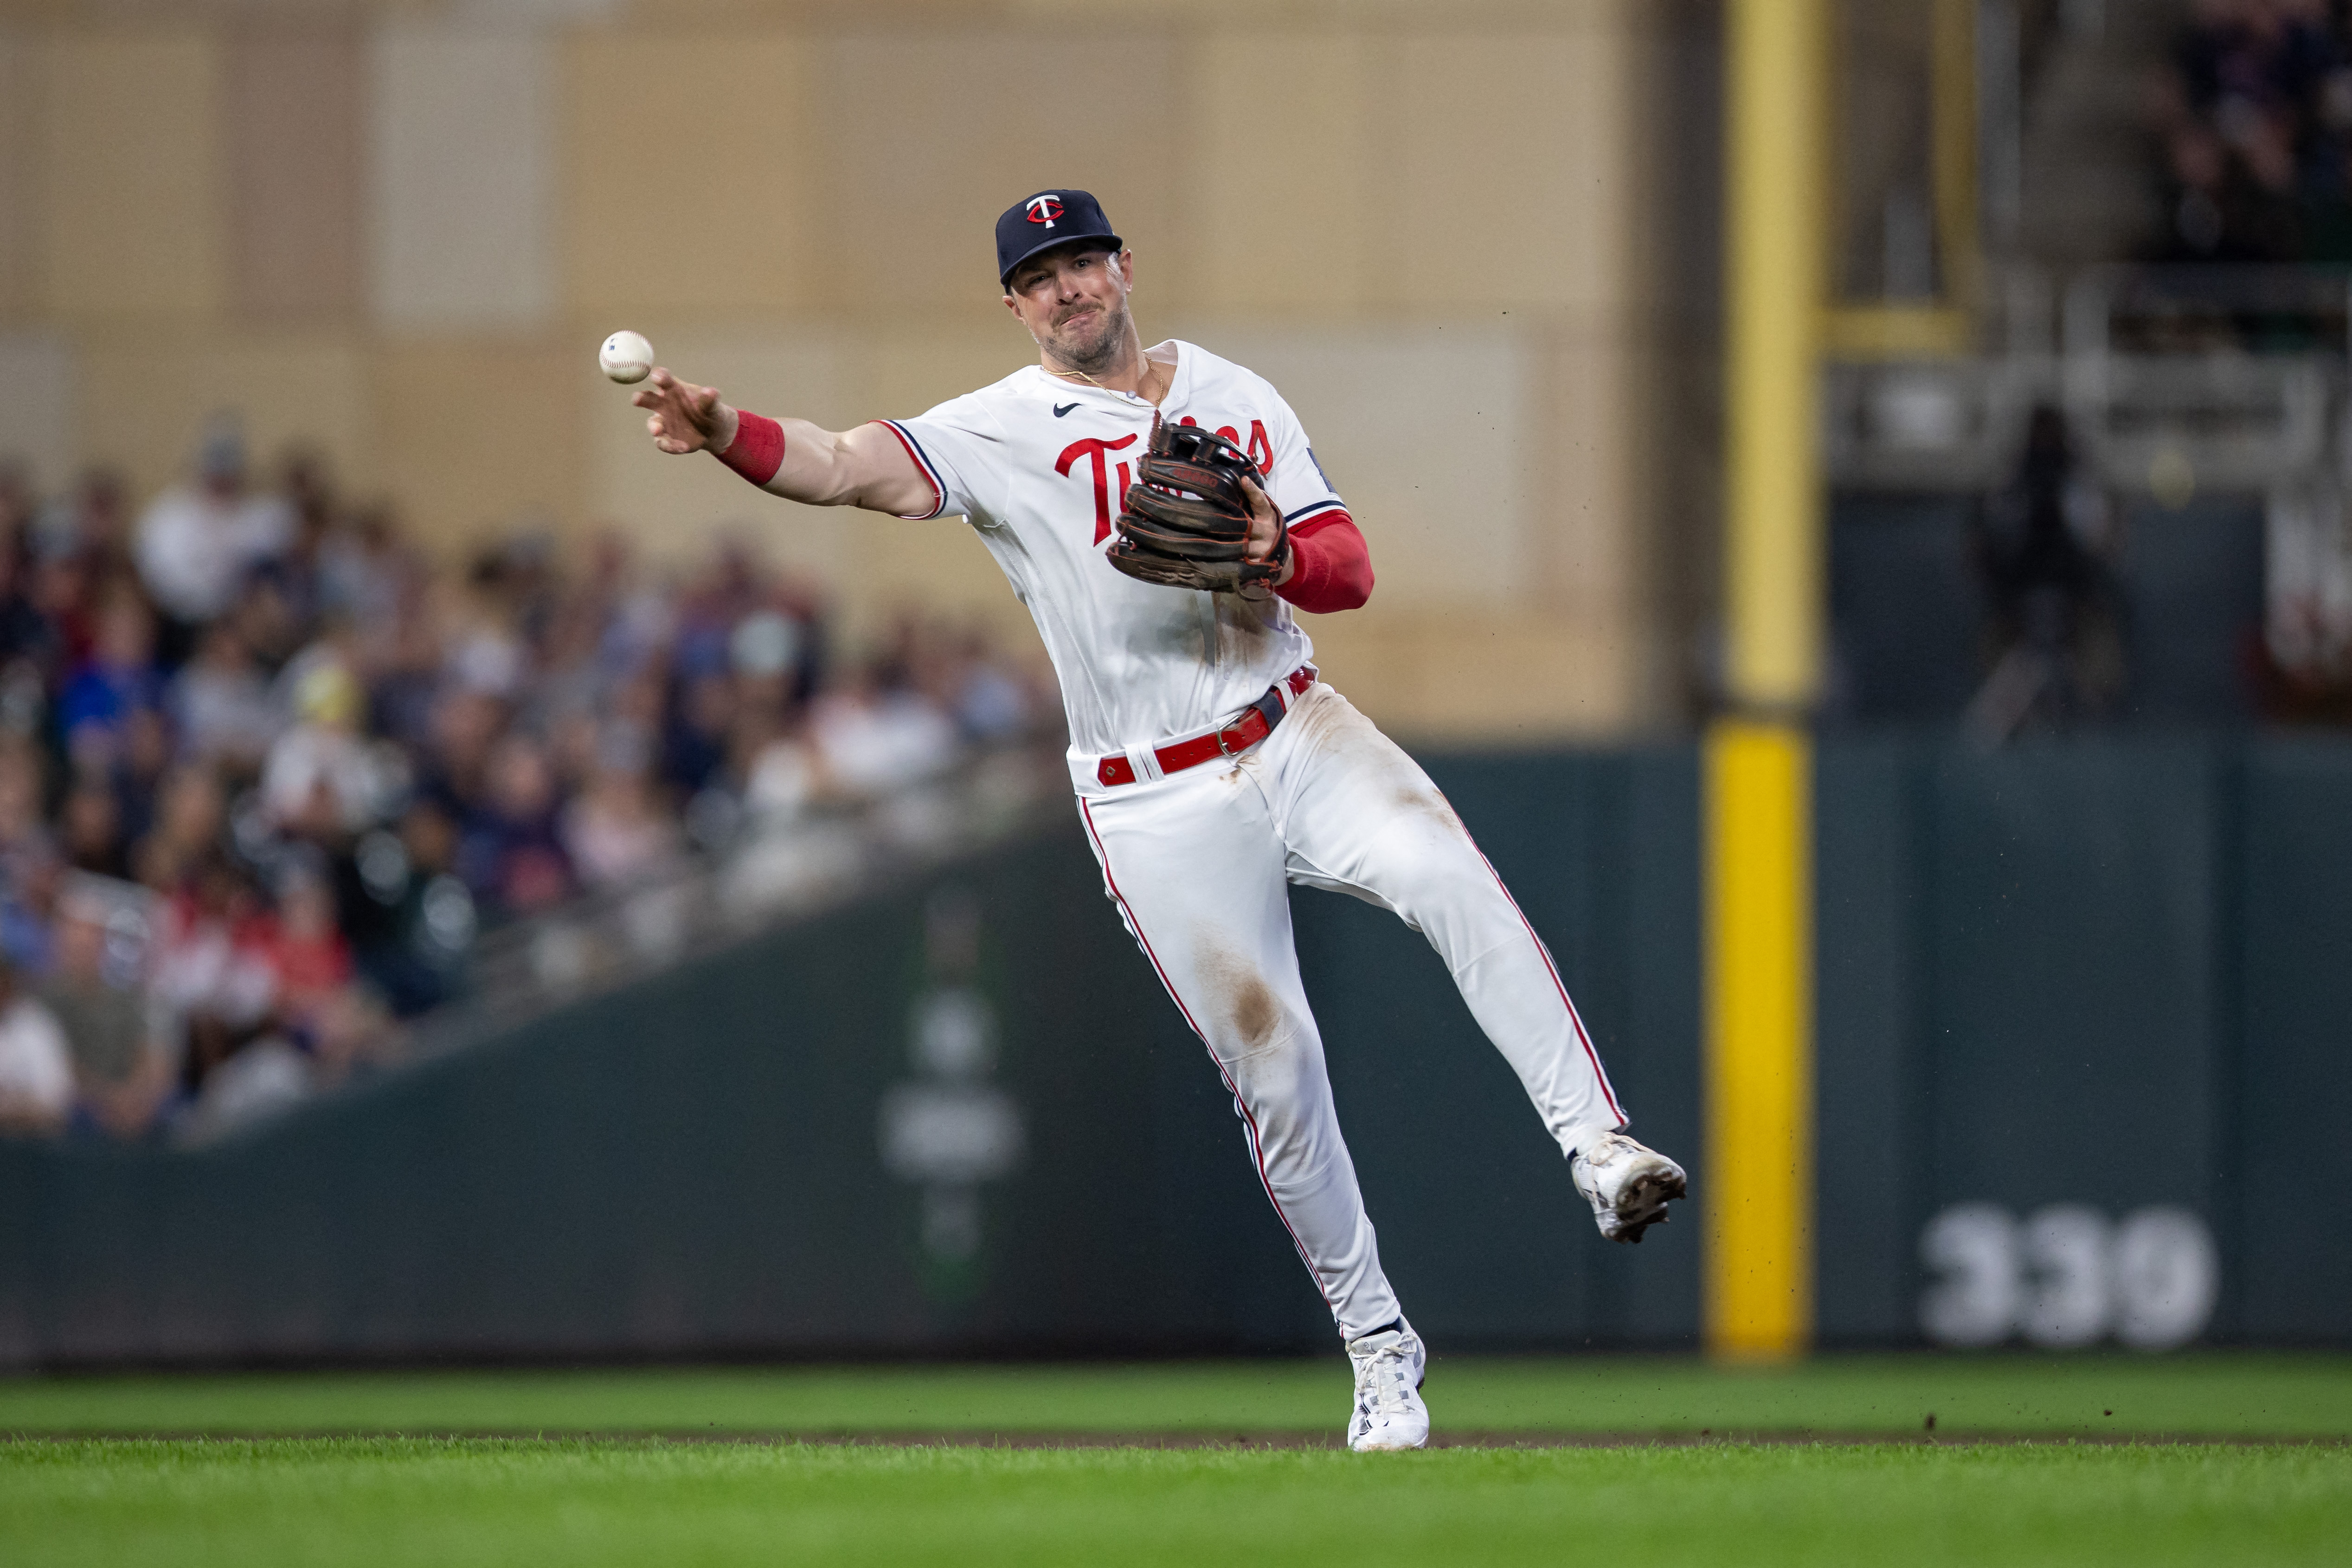 Minnesota Twins clinch AL Central title with win over Angels